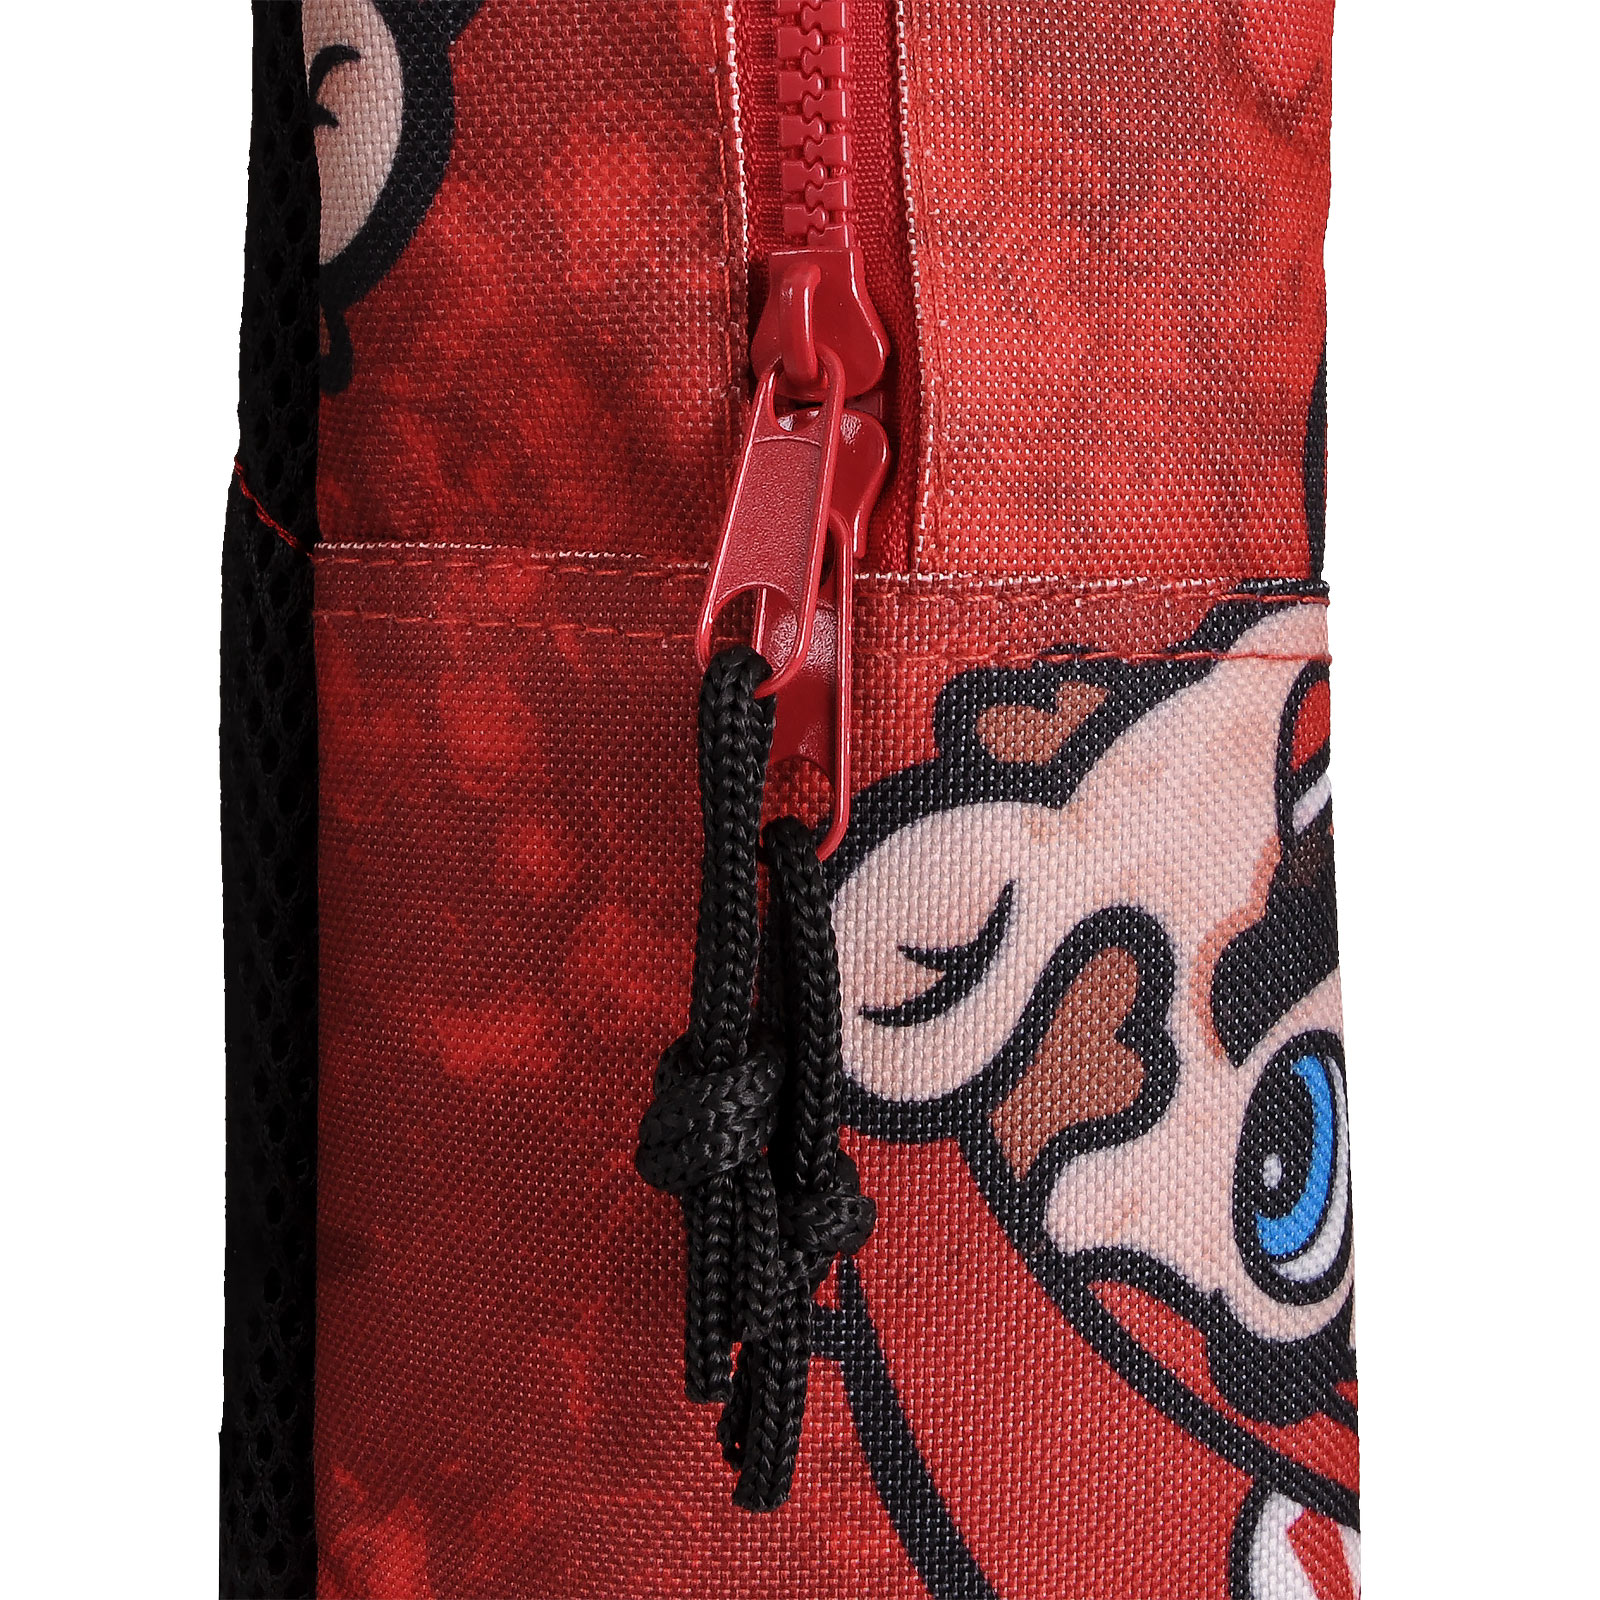 Super Mario - Faces Backpack Red